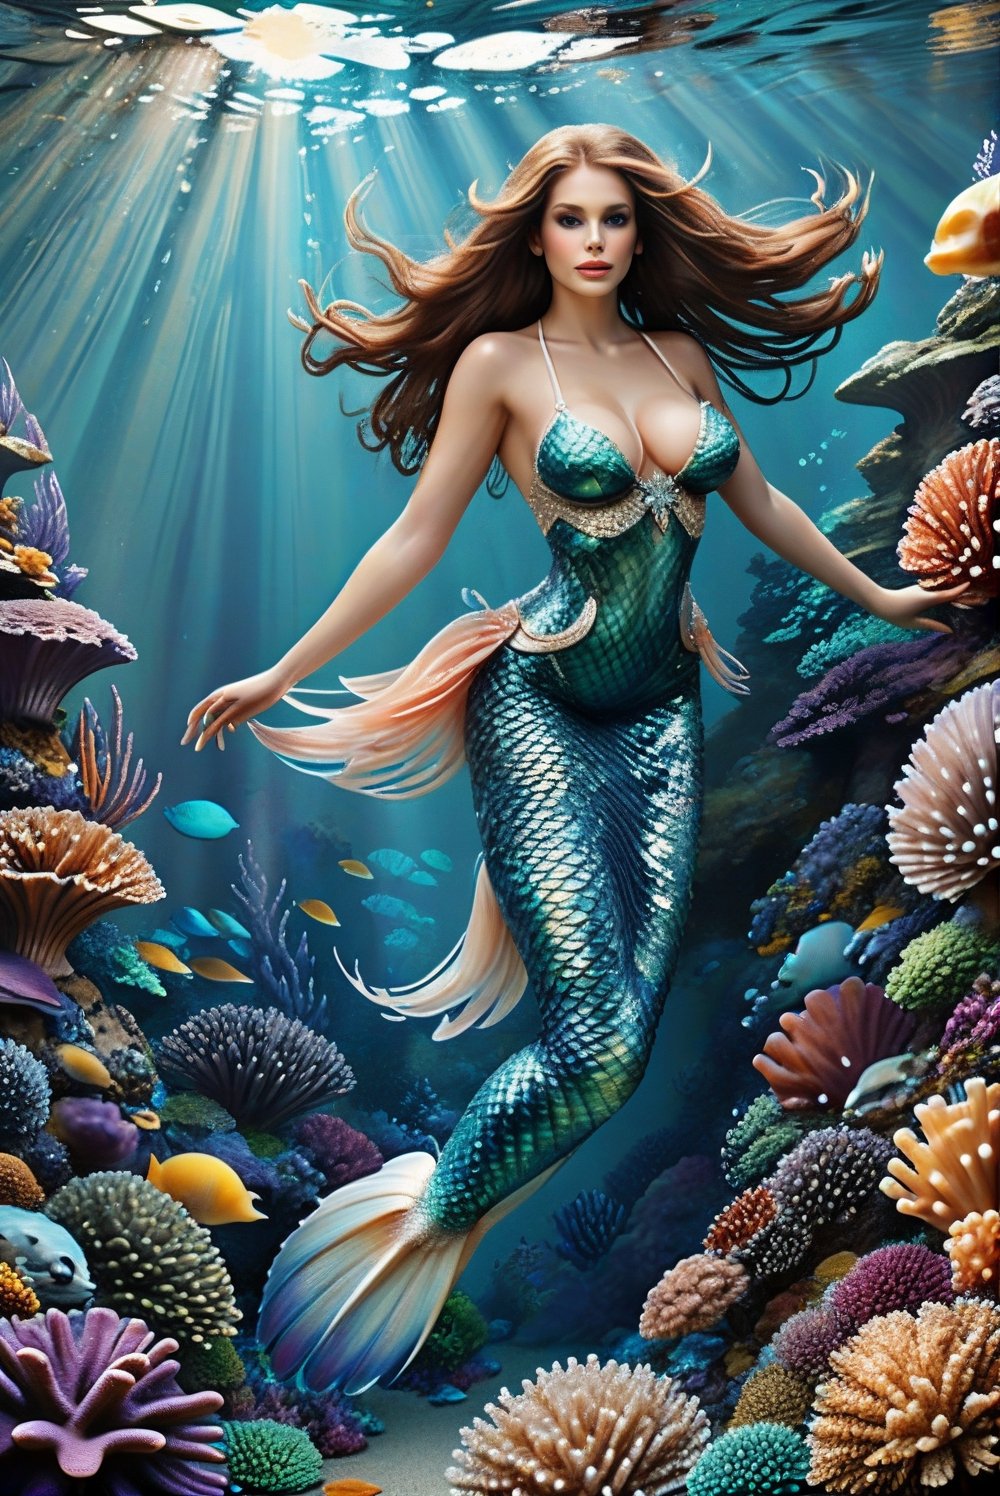 stunning, beautiful, mermaid, busty, long hair, flowing locks, shimmering, sparkling, scales, seashell accessories, grace, elegance, tropical fish, intricate coral formations, sunlight, sunrays, serene, illuminating, aquatic realm, realistic, Masterpiece, High Quality, High Resolution, detailed, uncensored, rich, vibrant colors, photorealistic, underwater,